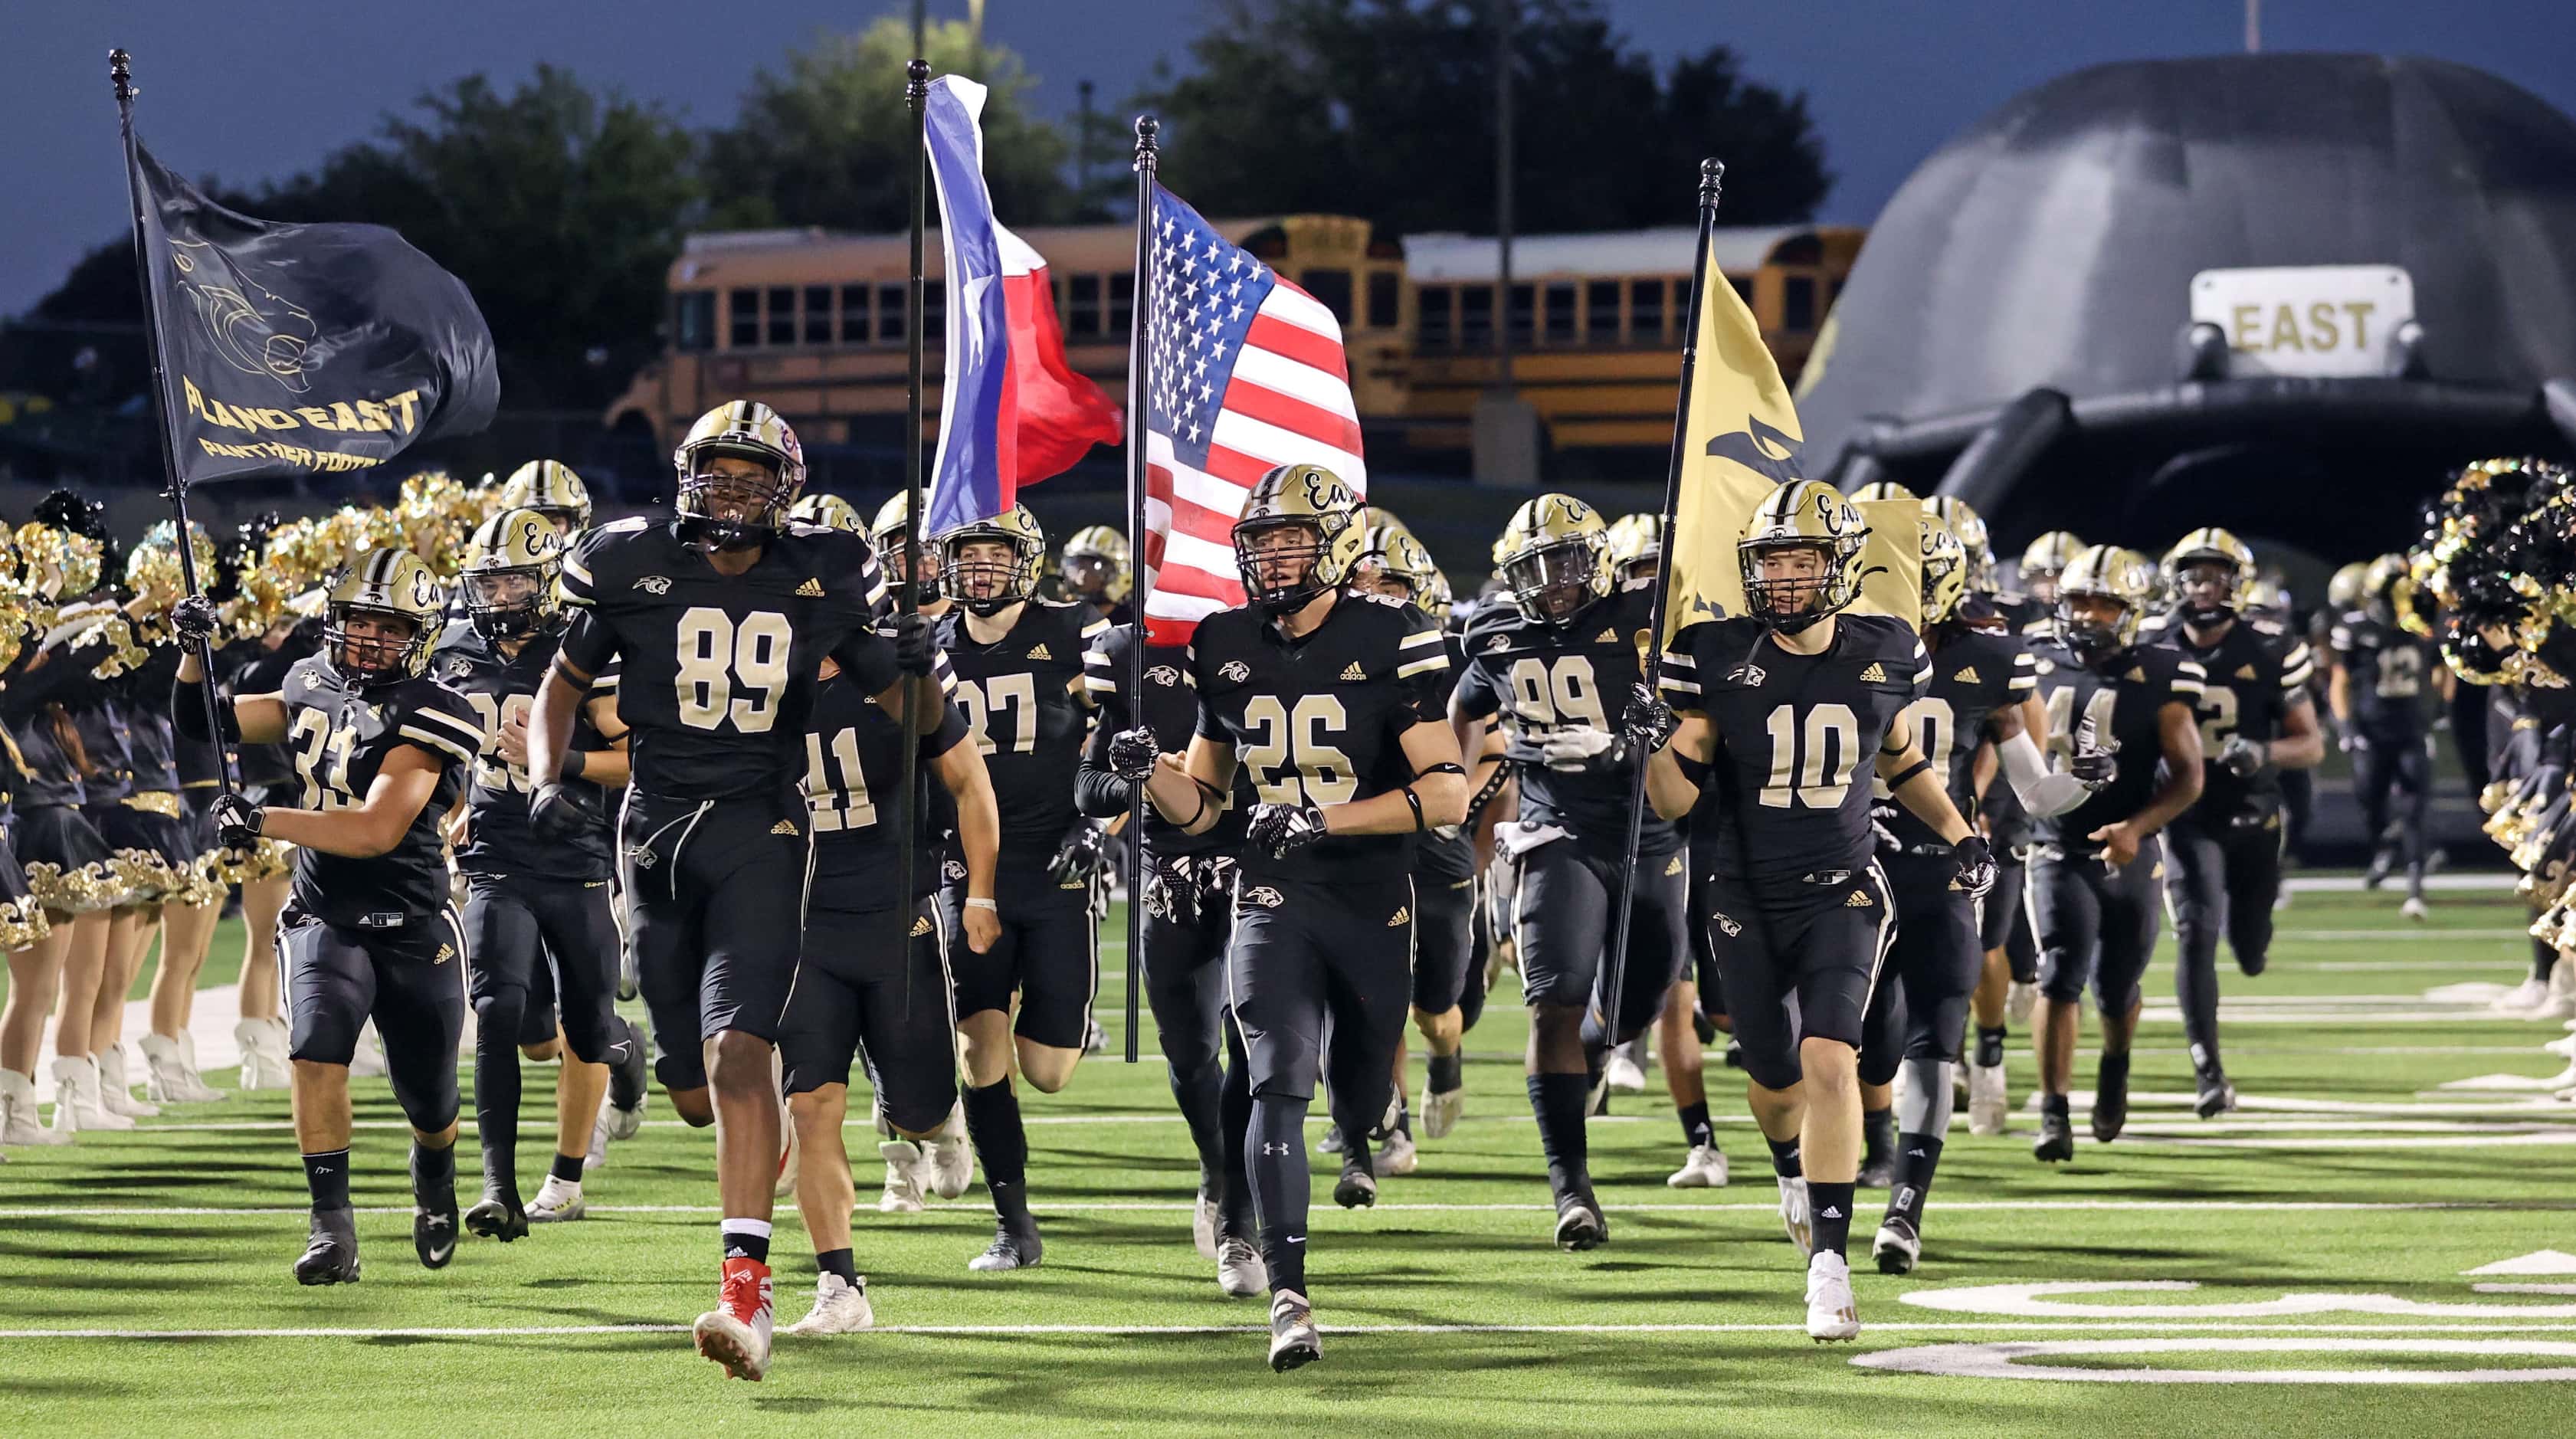 The Plano East high football team takes the field before the first half of a high school...